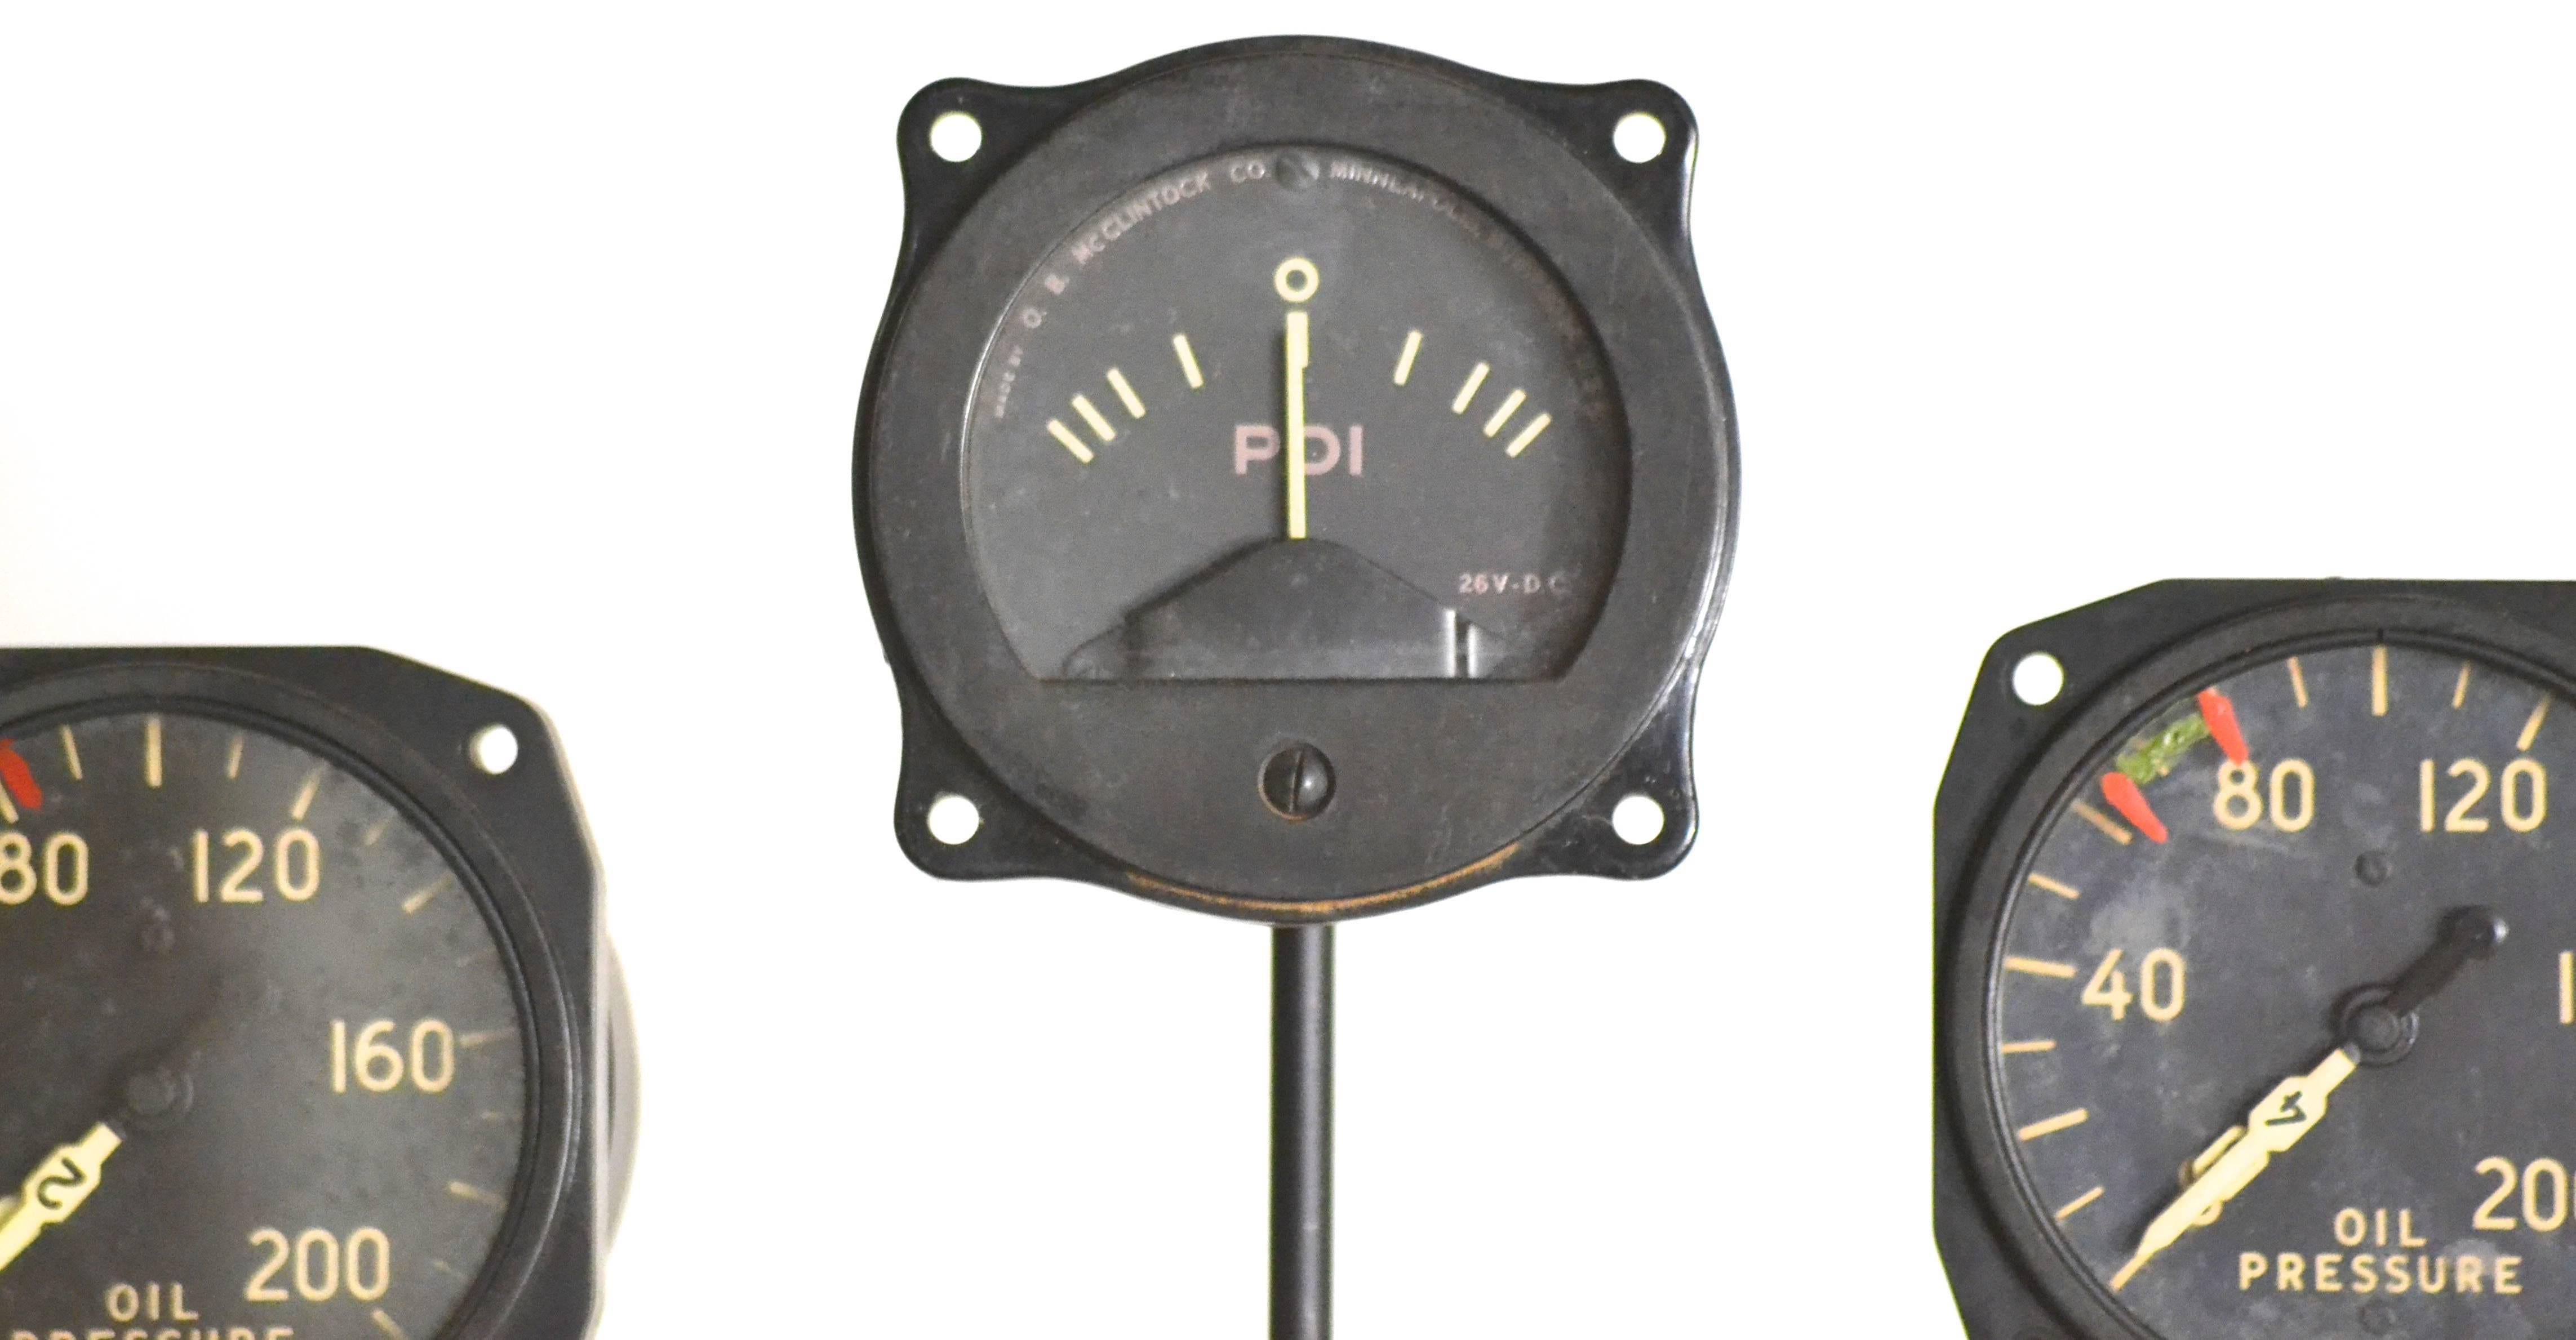 Authentic 74 year old WWII 
B-17 flying fortress & B24 liberators 
Cockpit instrument panel gauges

These gauges are from B-17 & B-24 WWII heavy bombers that were flown & used during WWII. 
Brave Americans flew the planes in many combat